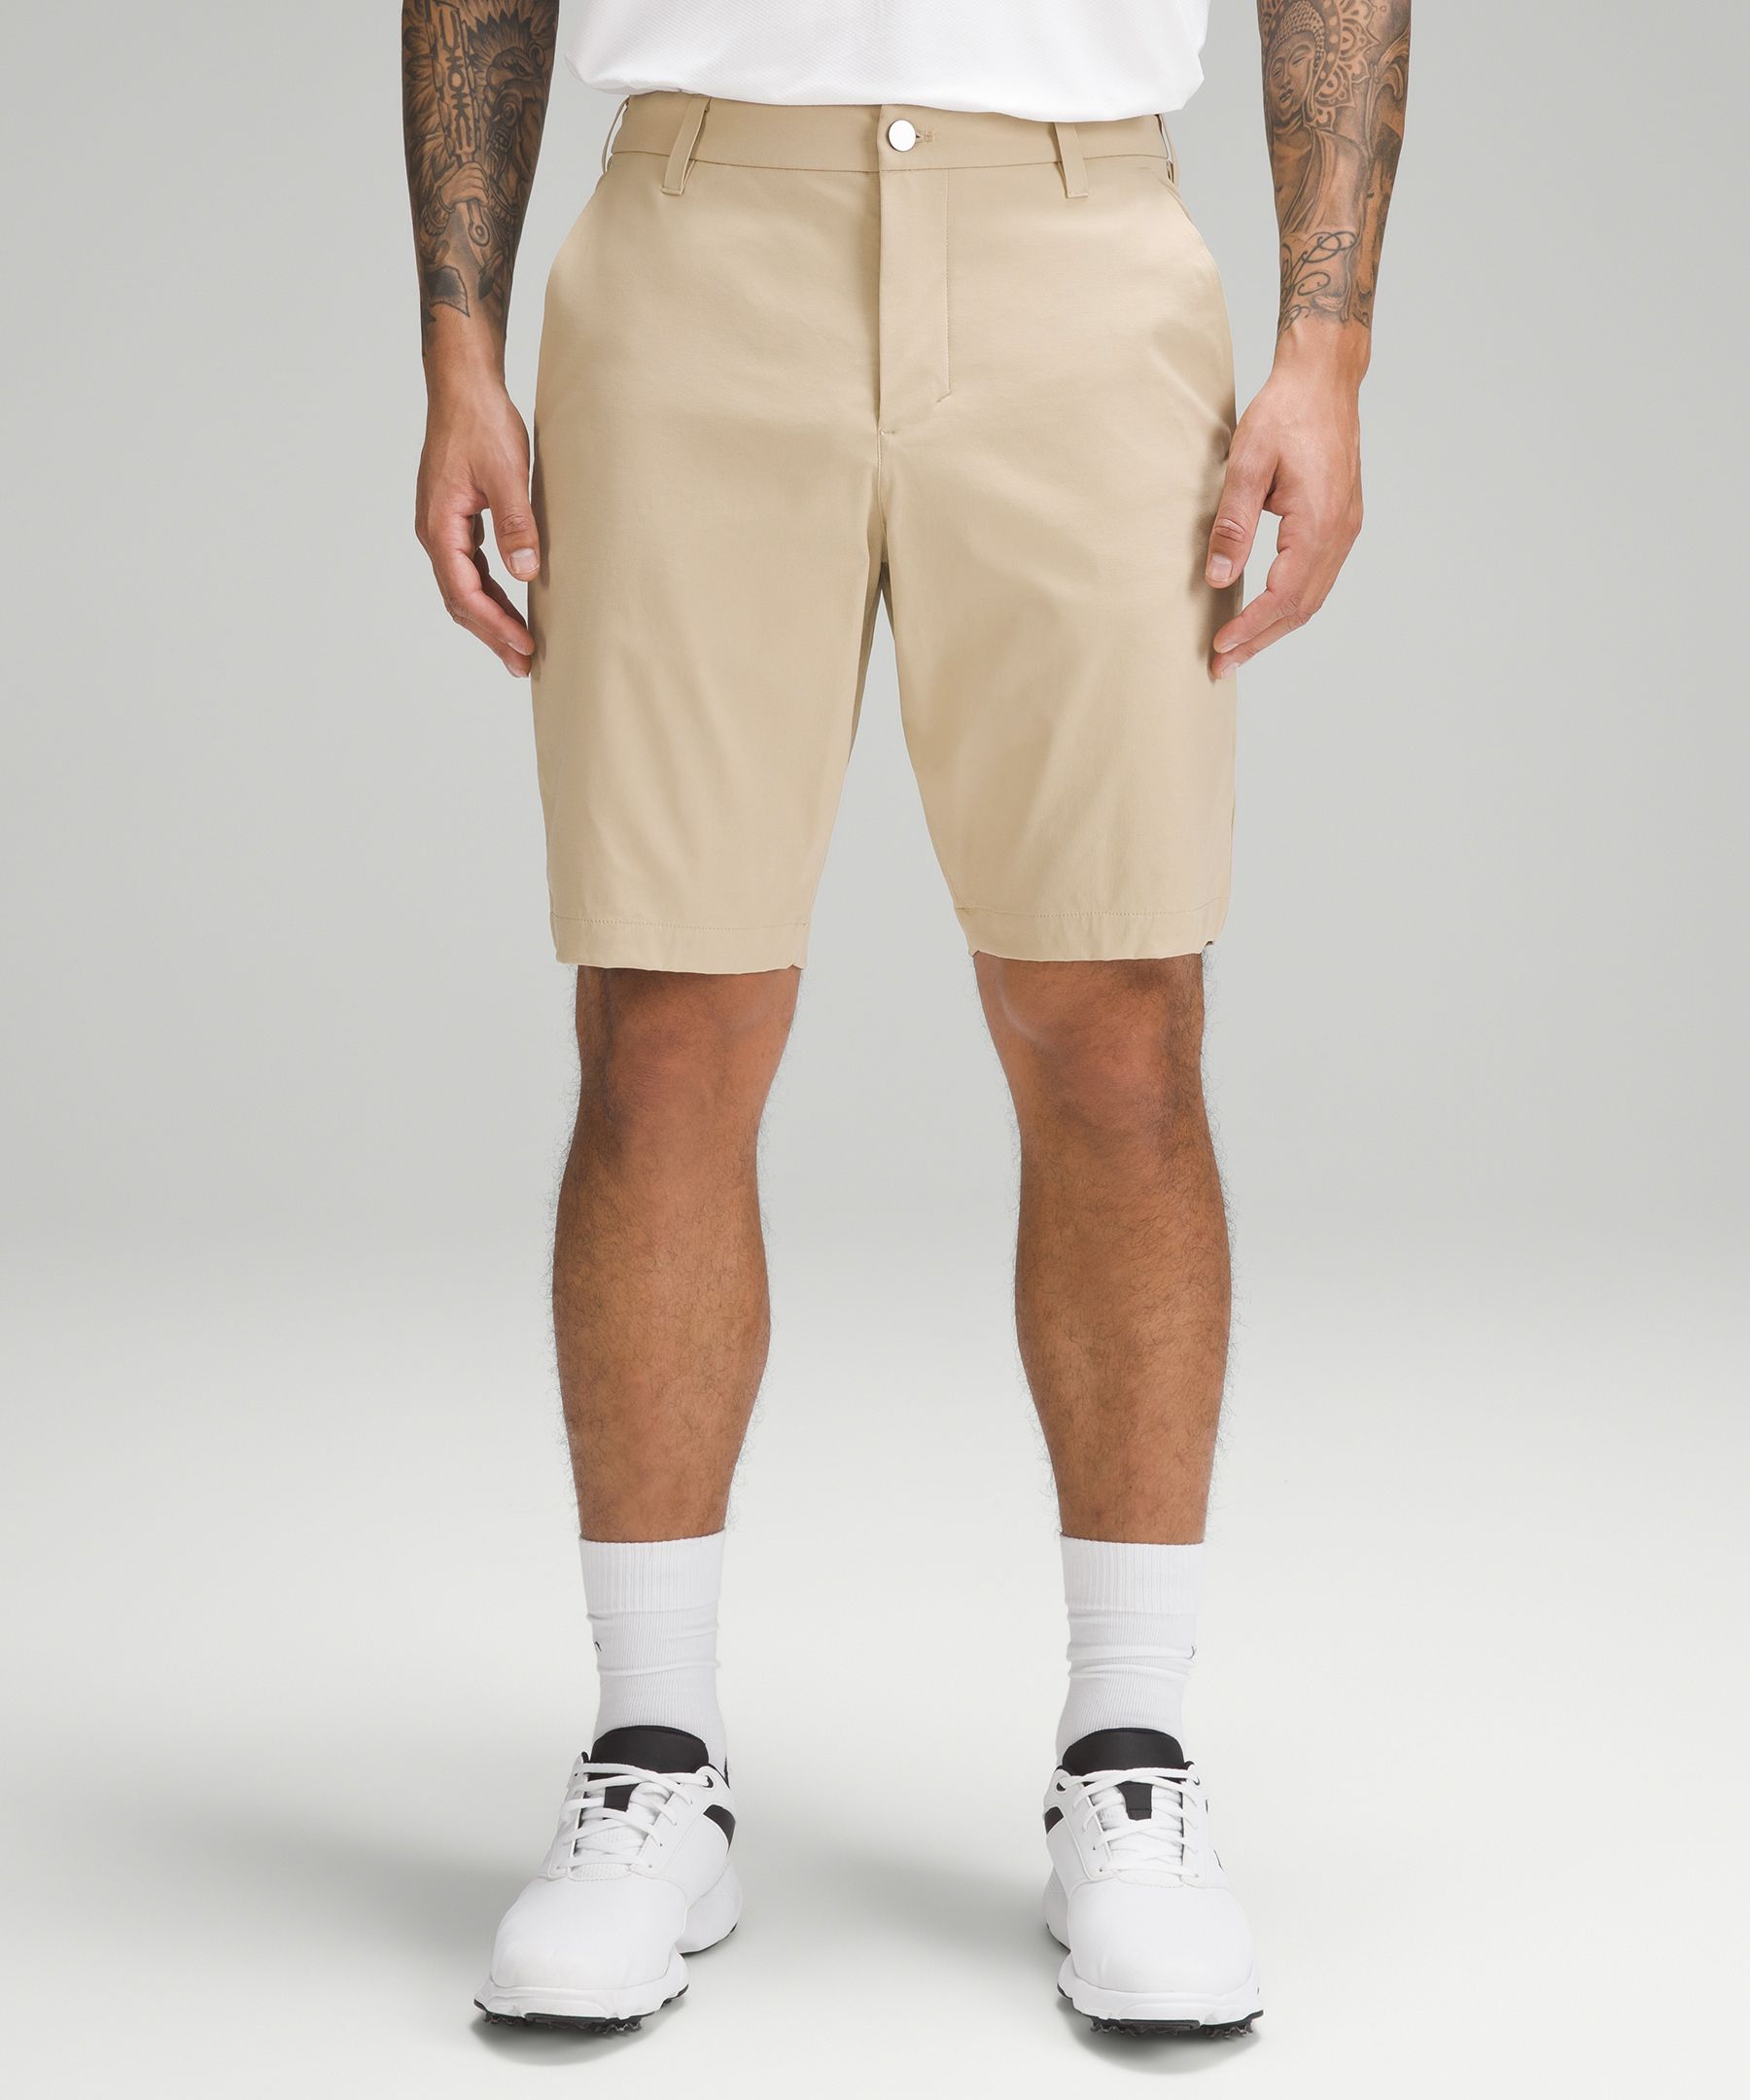 Lululemon Commission Golf Shorts 10" In Trench